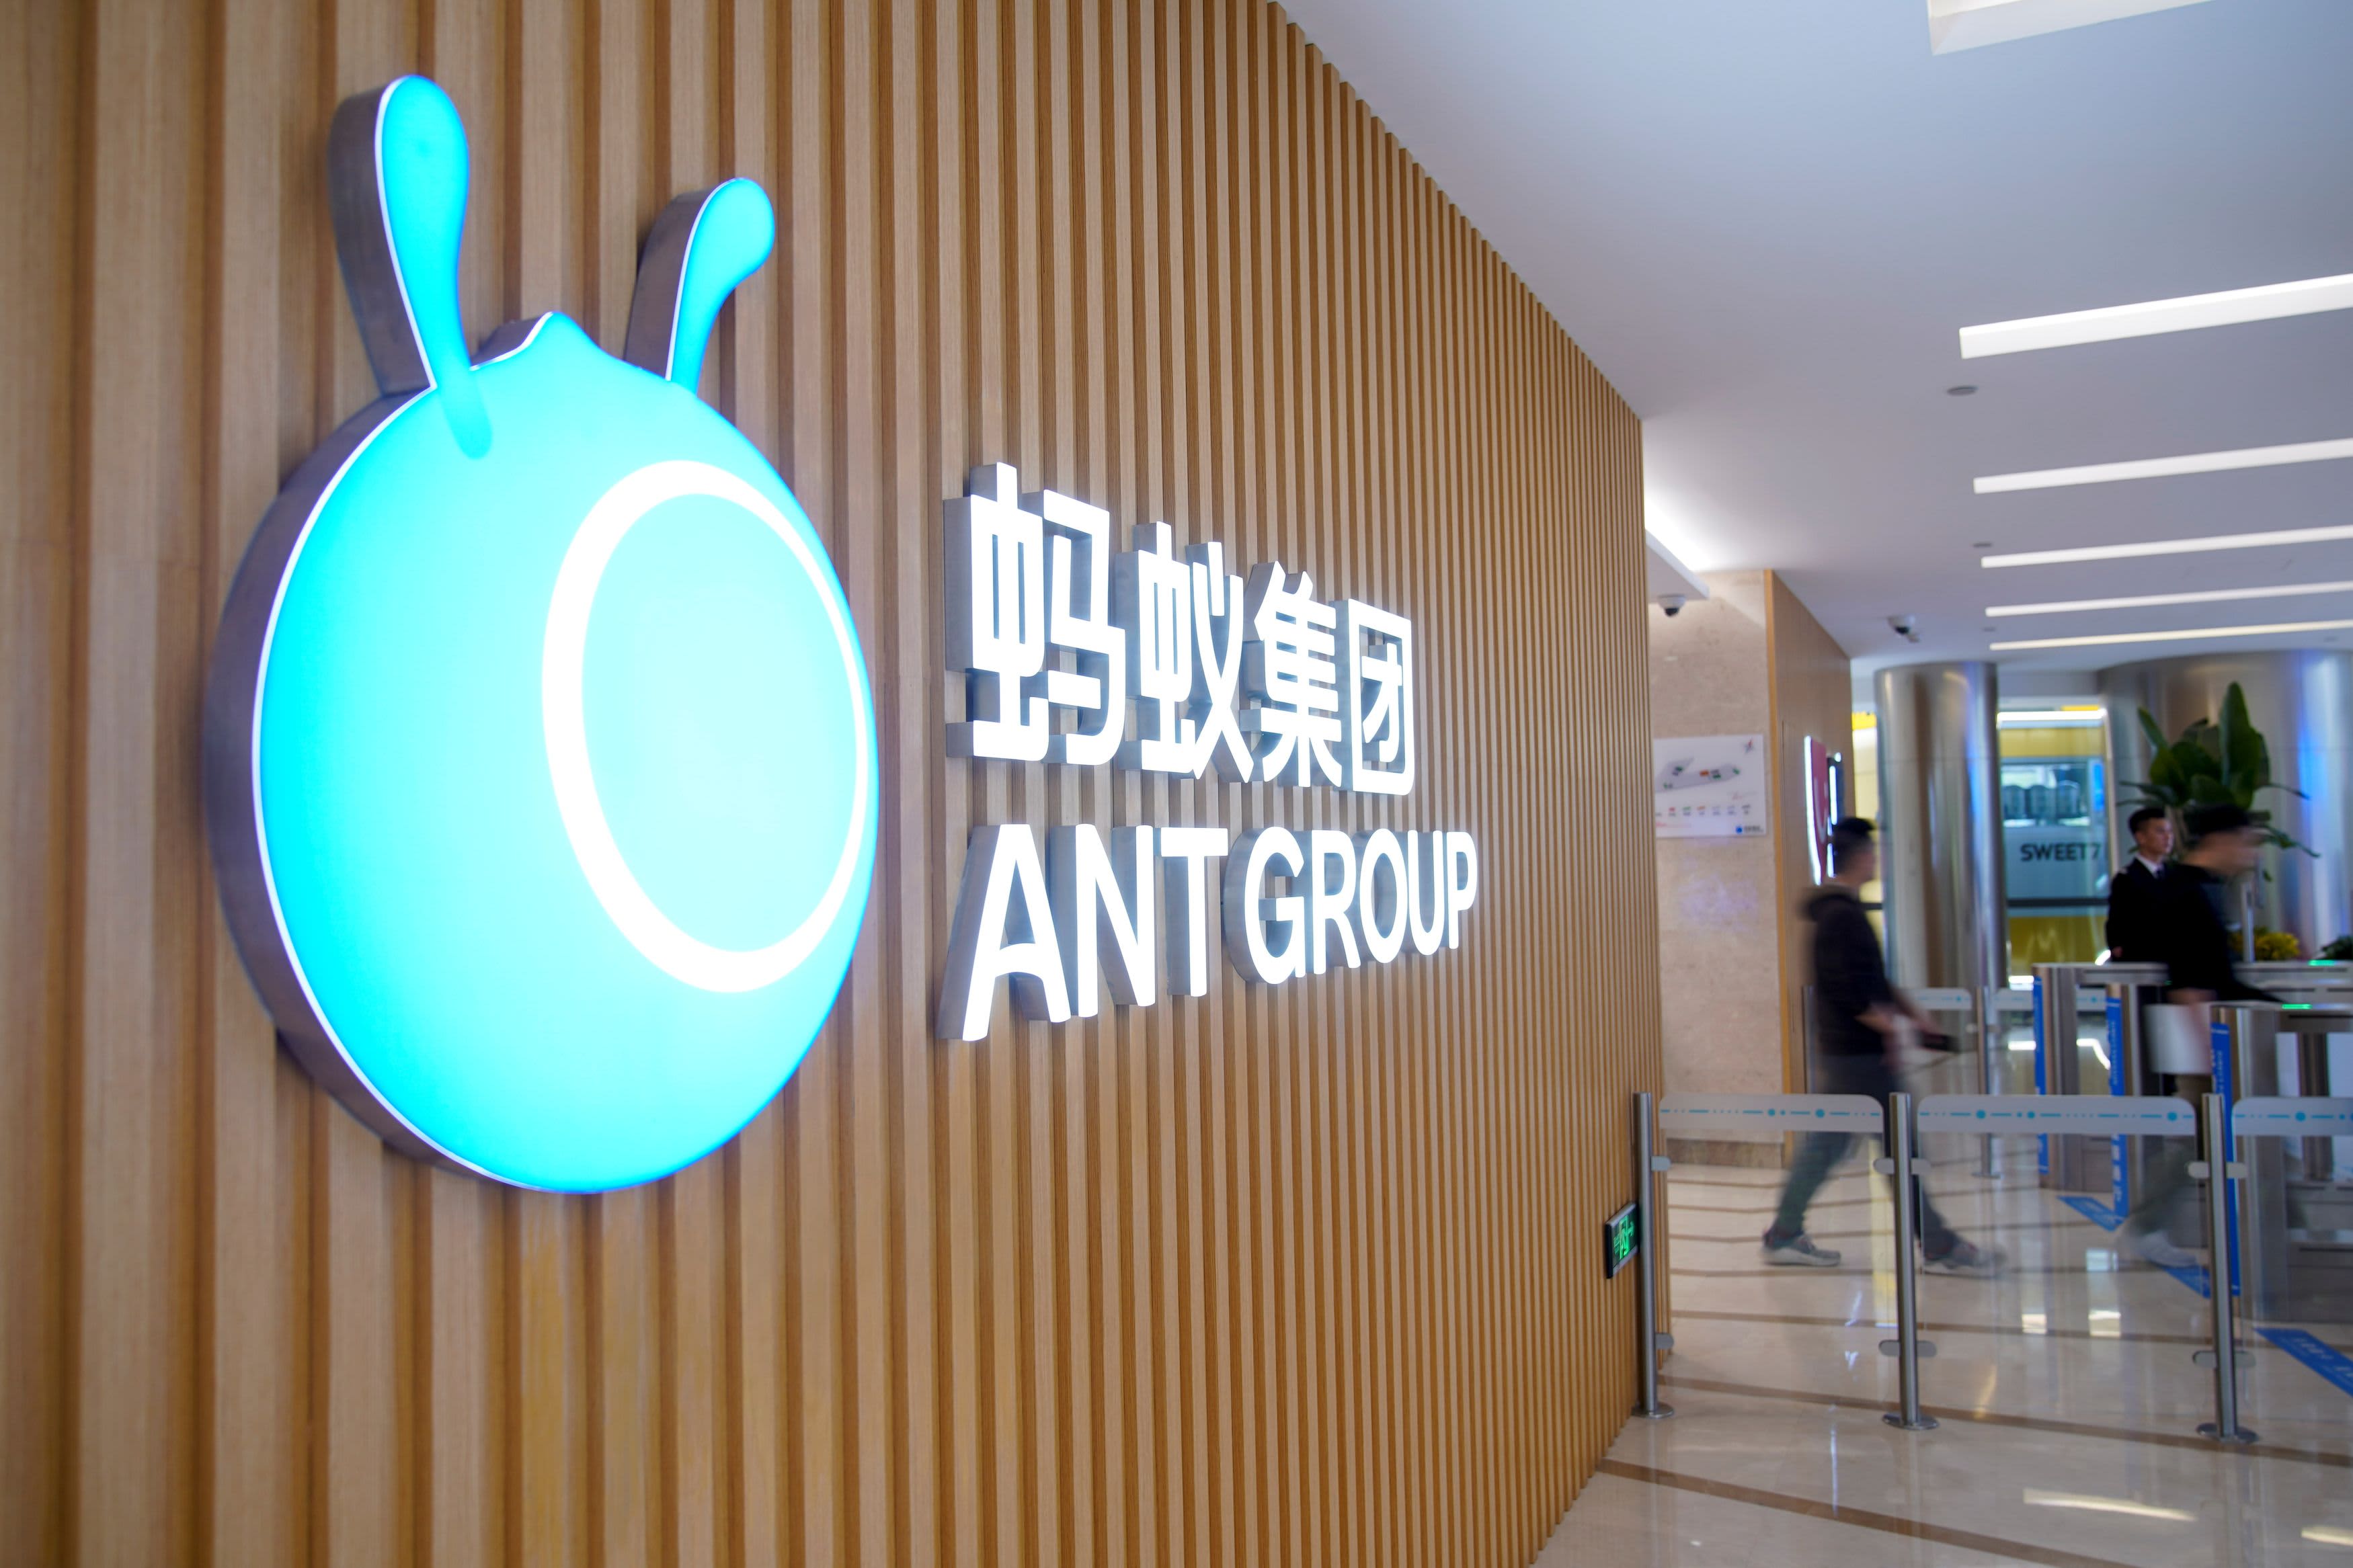 Ant Group says it will help employees monetize shares after the IPO is canceled